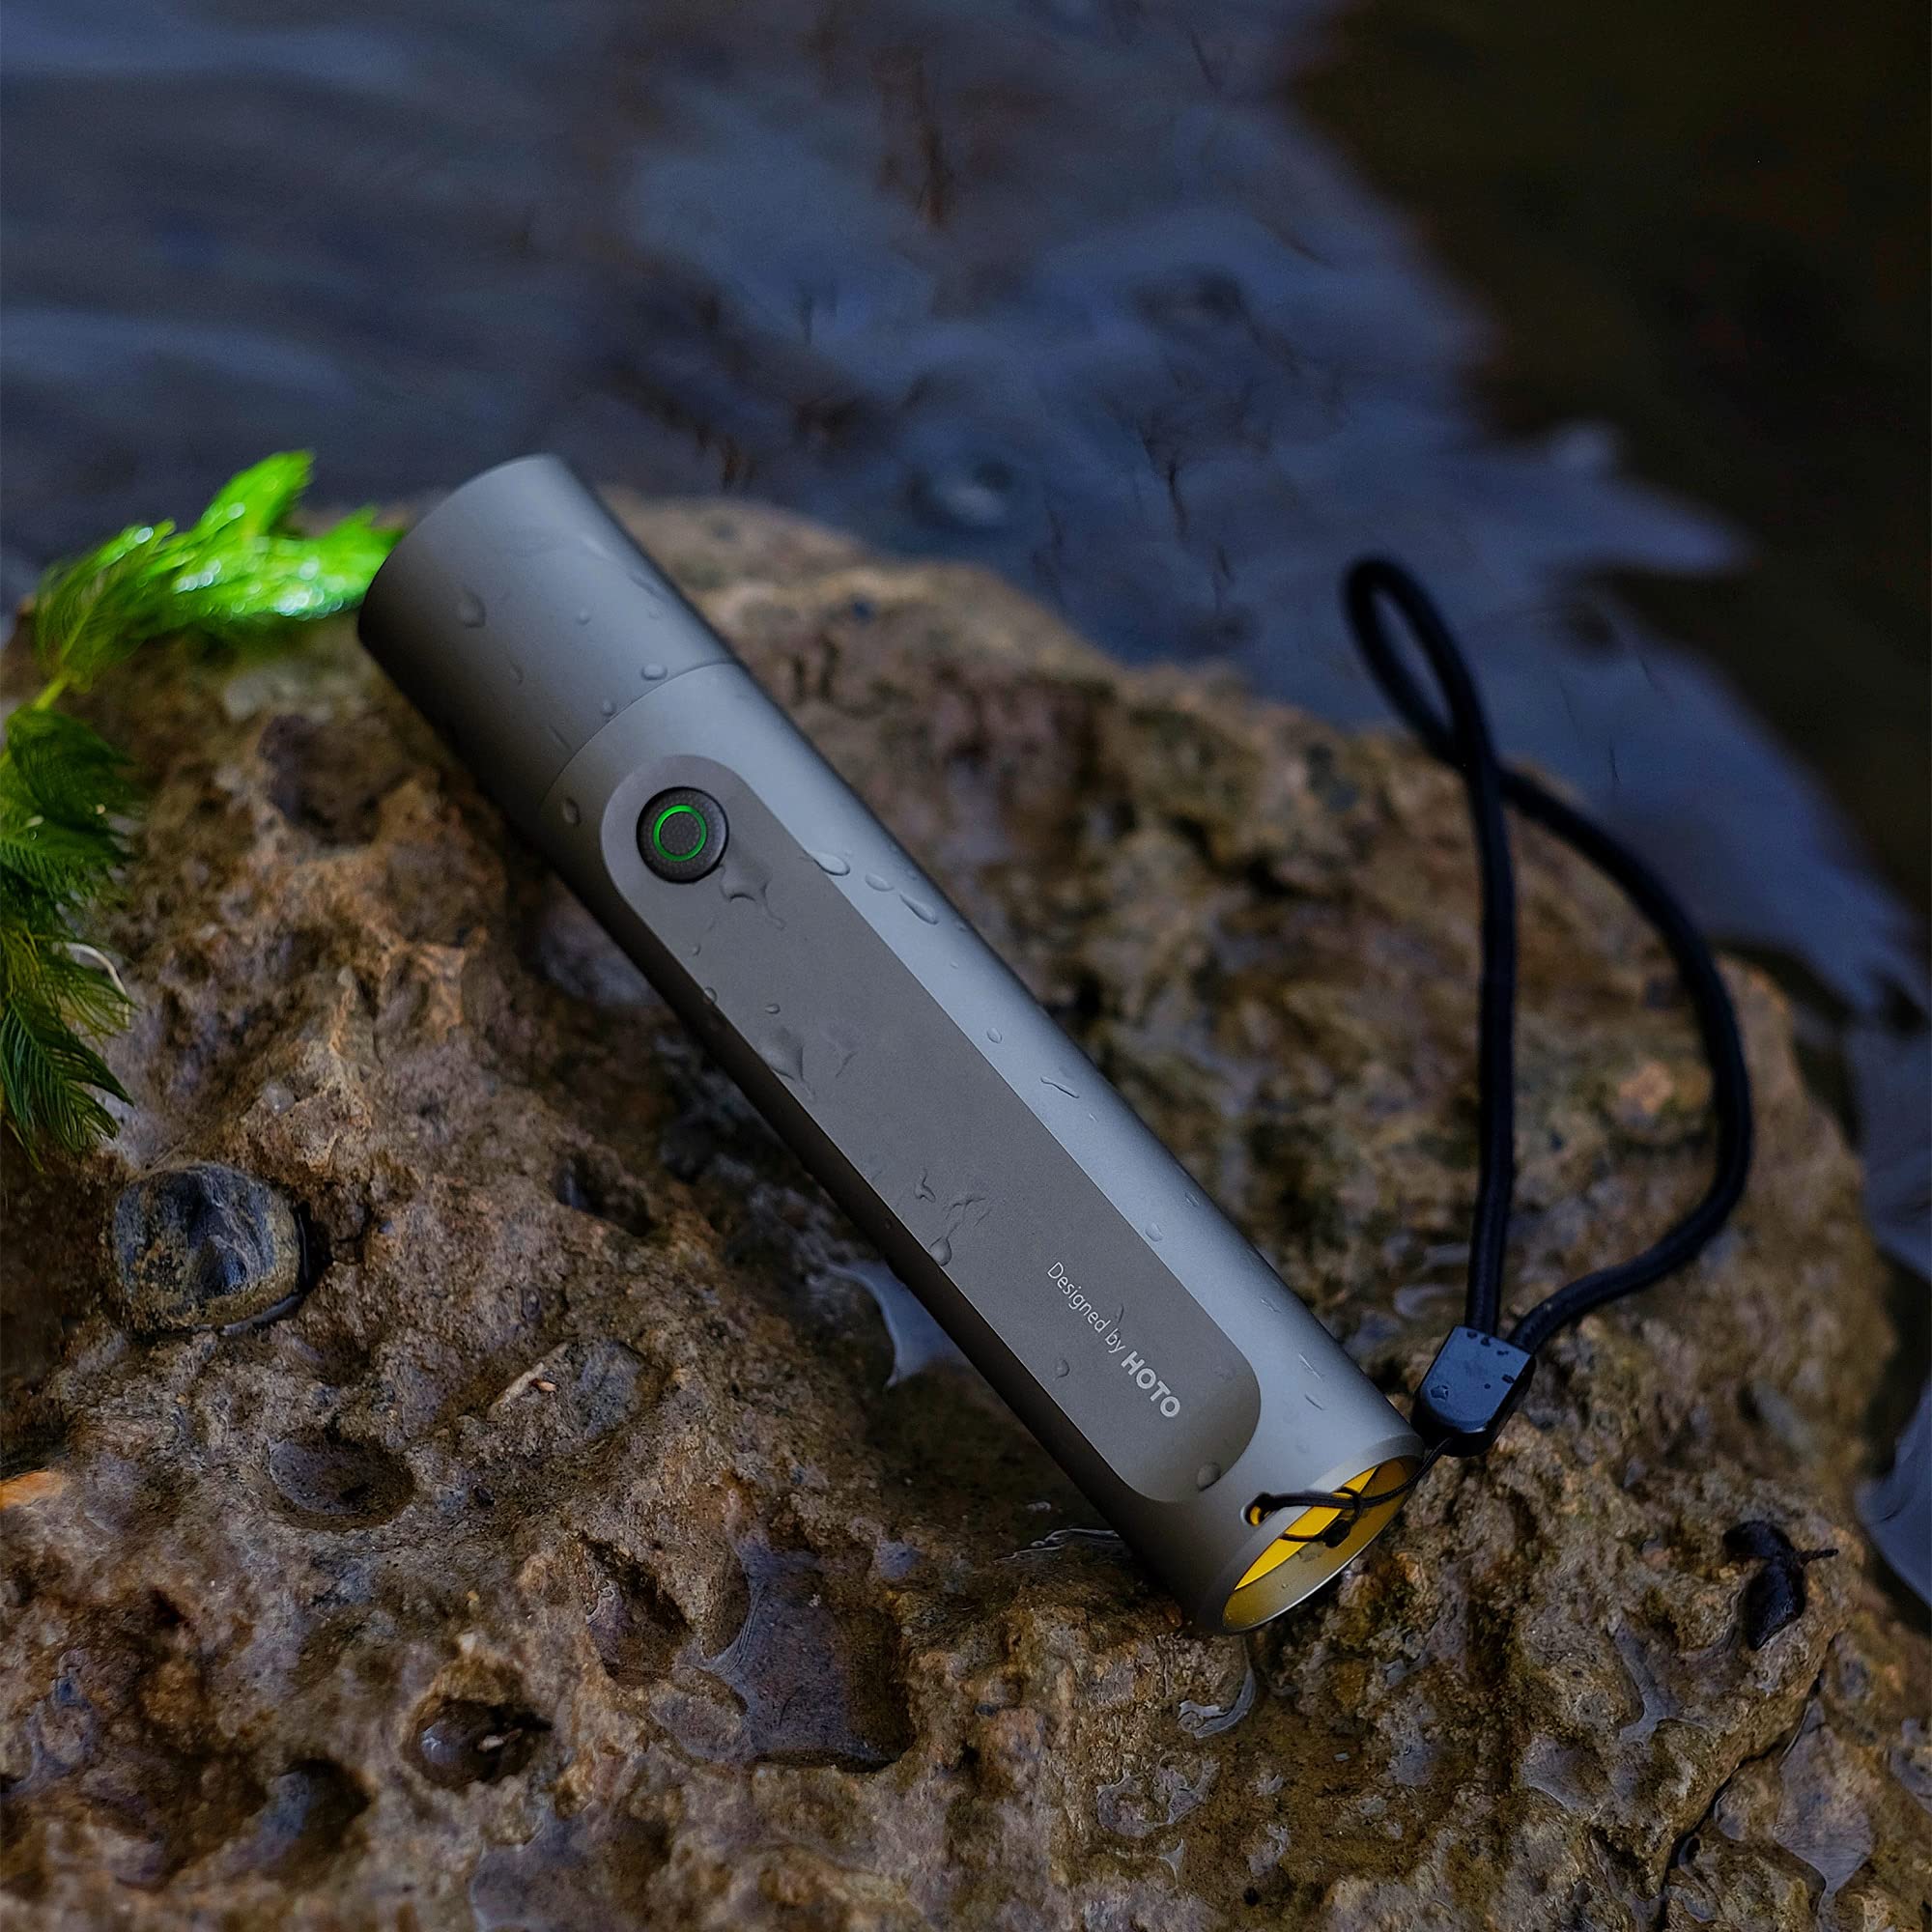 HOTO Flashlight Fit, LED Rechargeable, USB-C Charging, 3 Modes, Up to 24 Hours, 1500mAh, 280 Lumens, 656ft, IP55 Waterproof, Compact Flashlight Widely Used in Camping, Hiking, Emergency, Mountaineerin